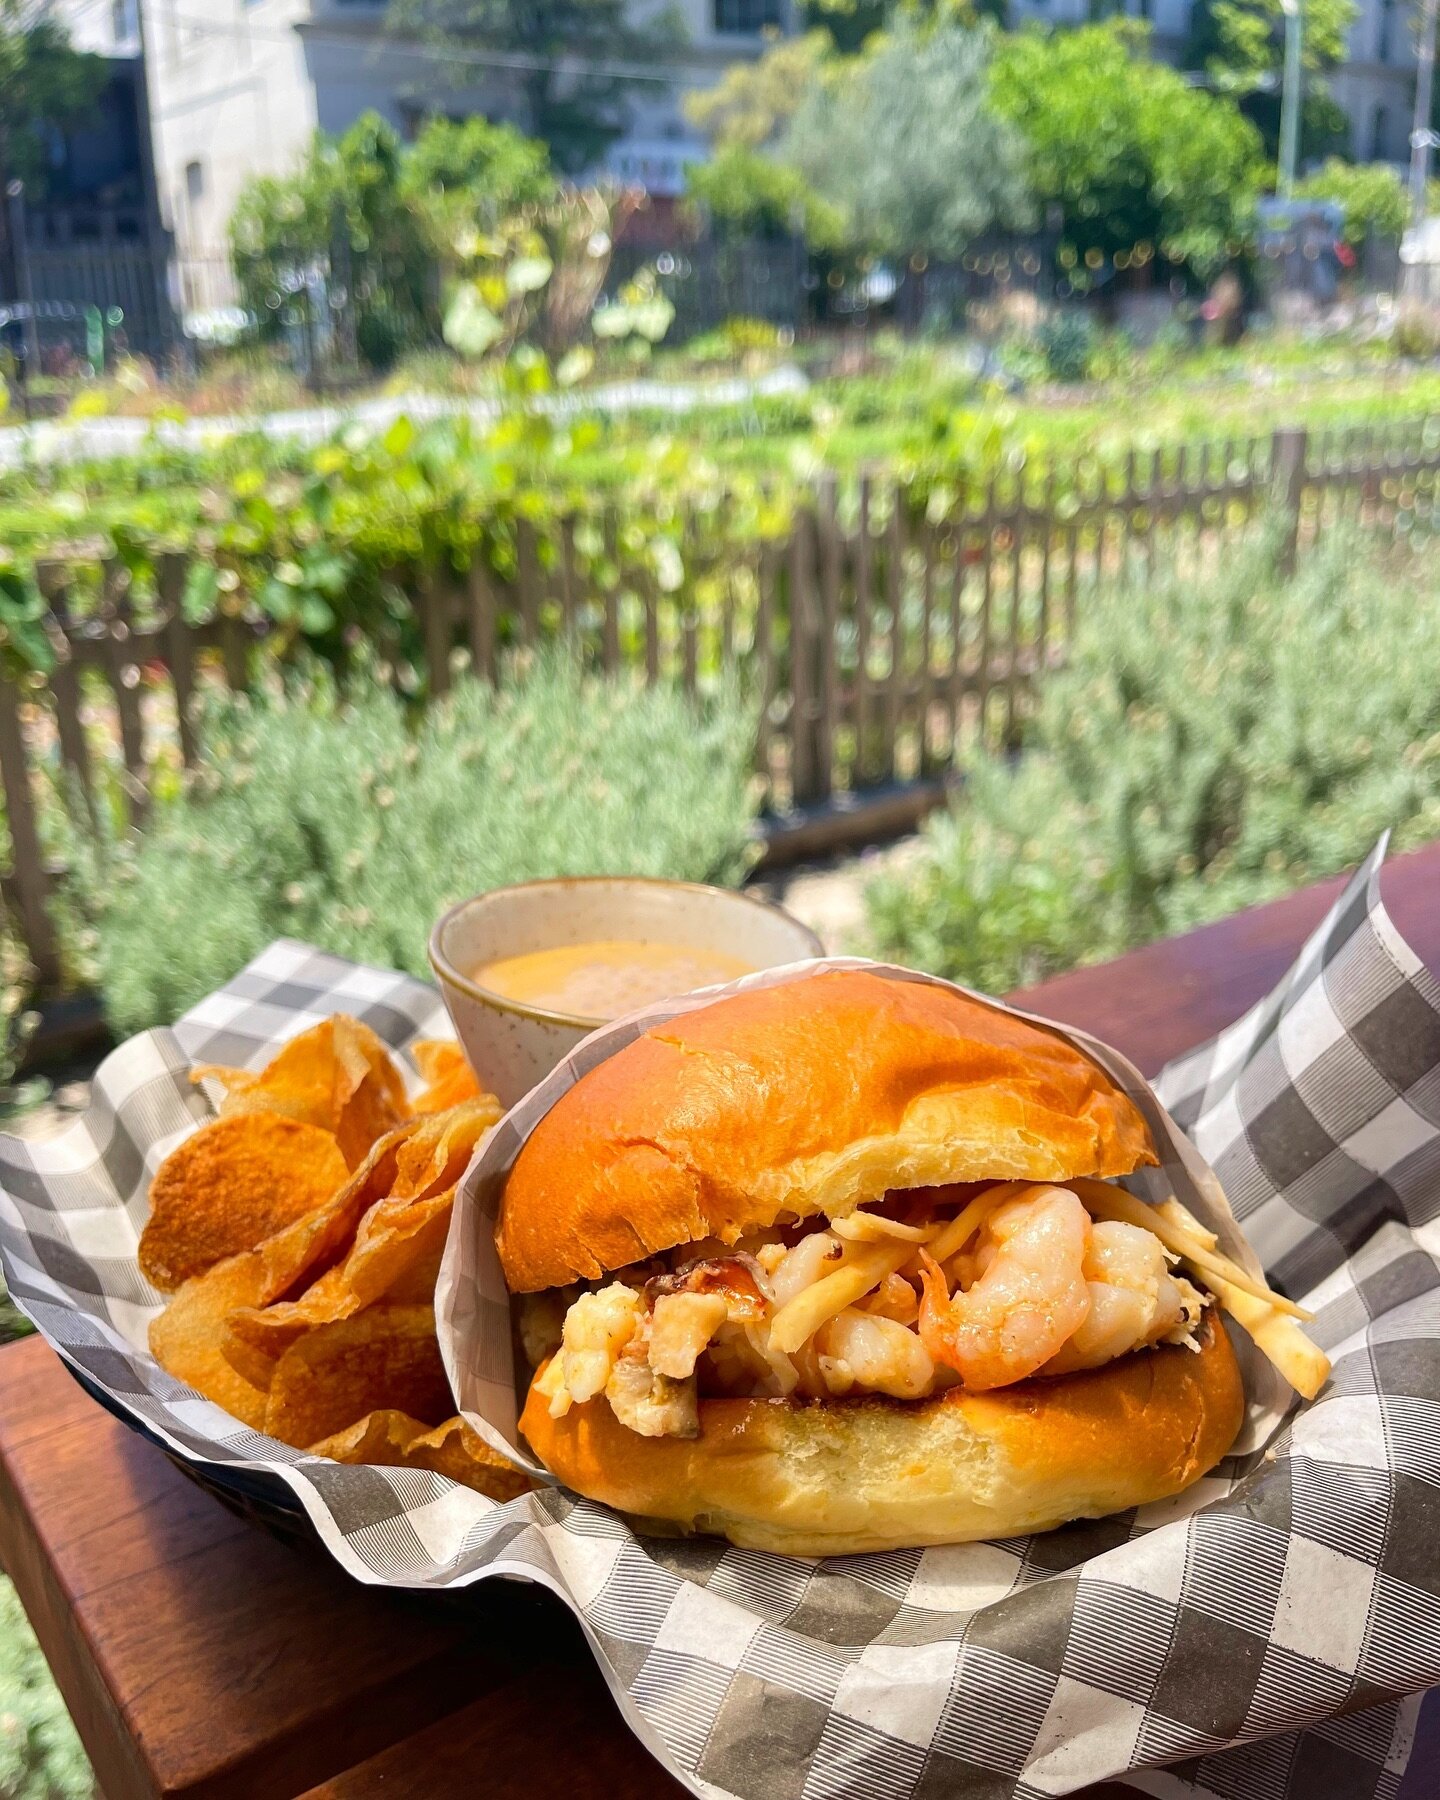 🤤🦞 Lobster &amp; Prawn Head Chowder Roll - Specials this week! 
Would not want to miss out if I were you 😉